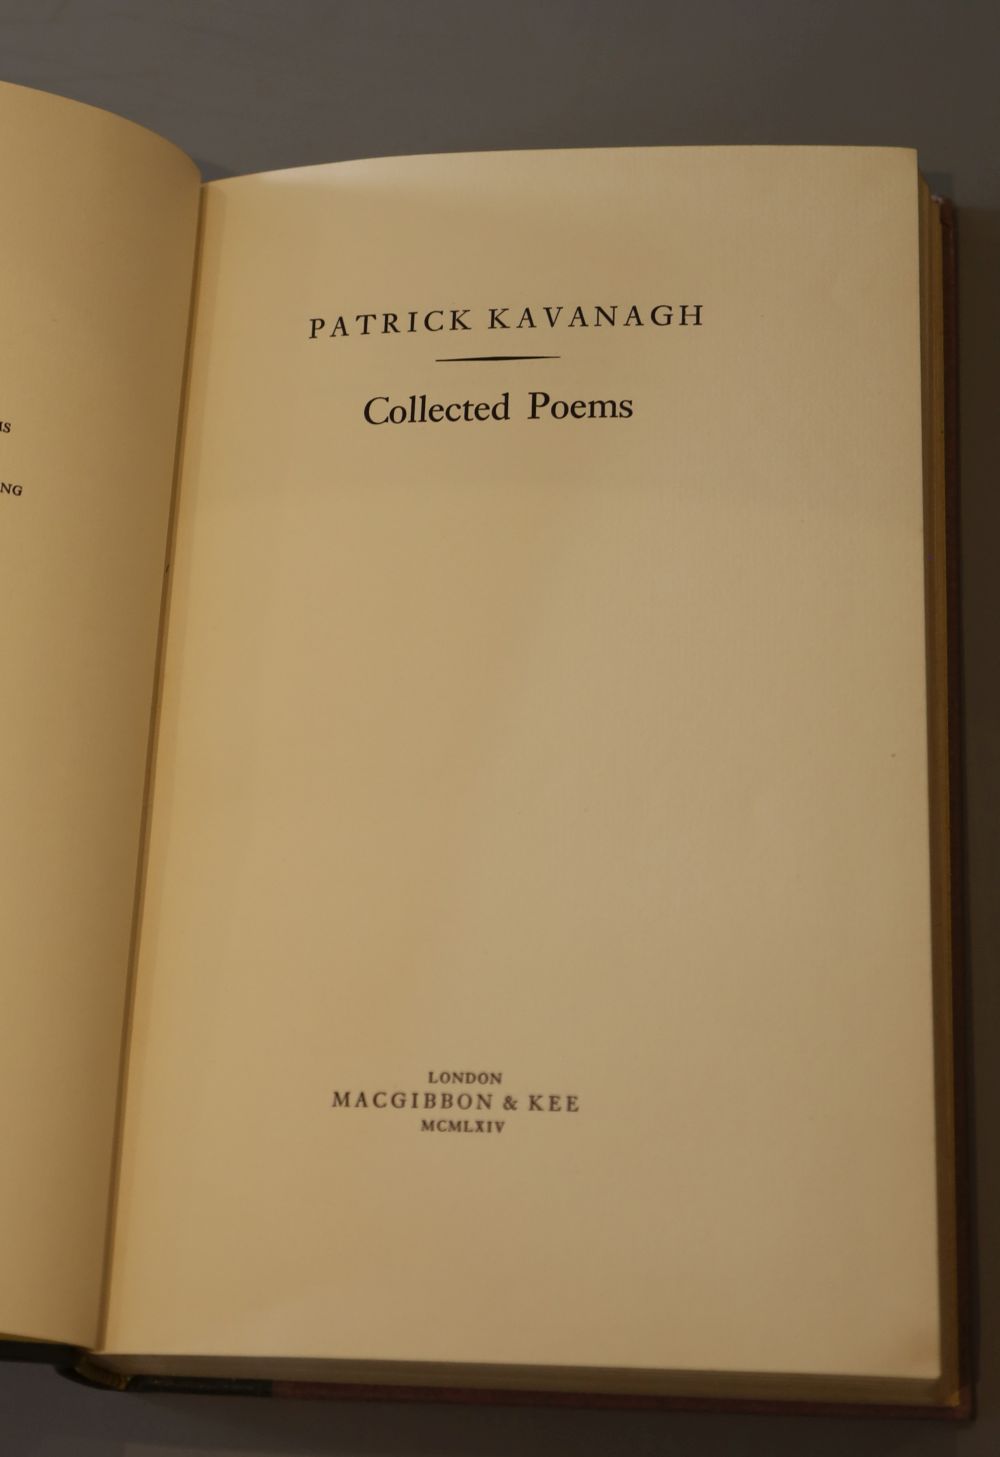 Kavanagh, Patrick - Collected Poems, a special signed limited edition, number 52 of 100, 8vo, original boards, with slip case, MacGibbo